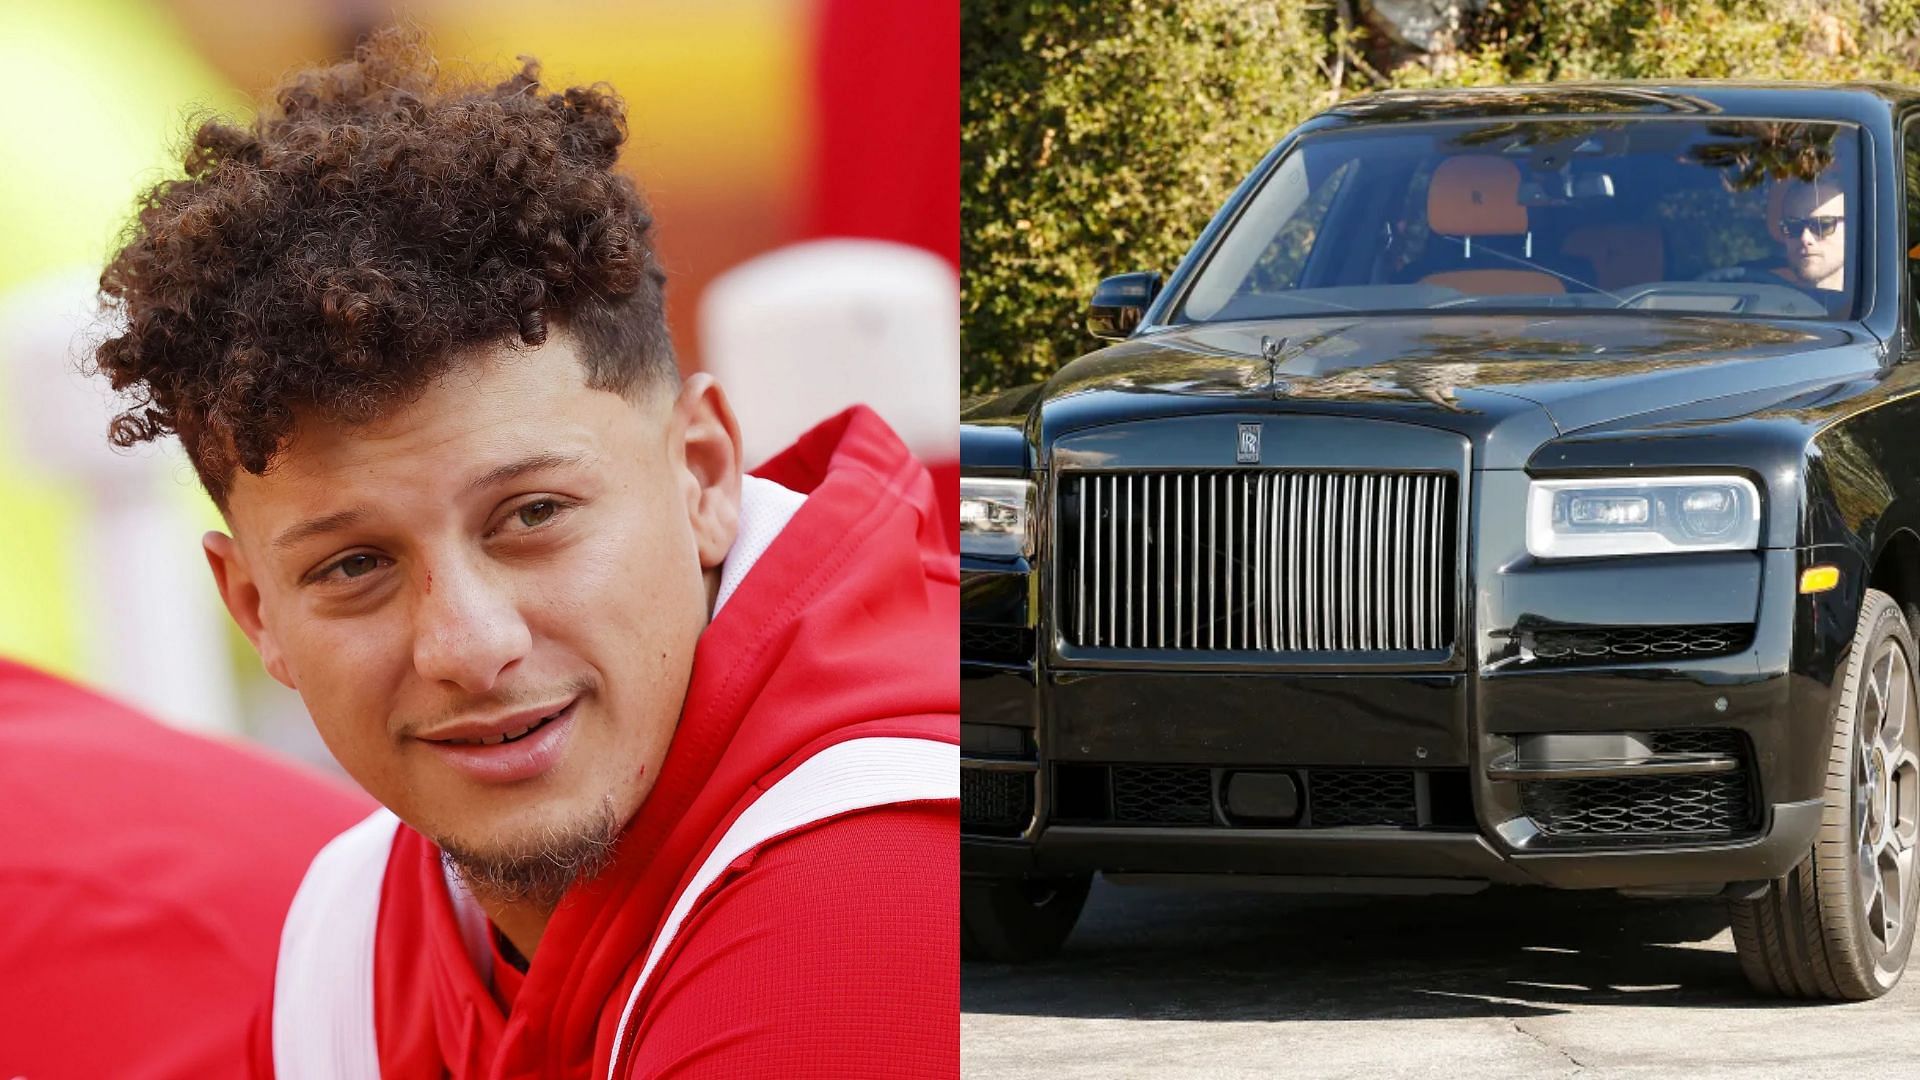 A Rolls-Royce Culinan is among the cars Patrick Mahomes owns